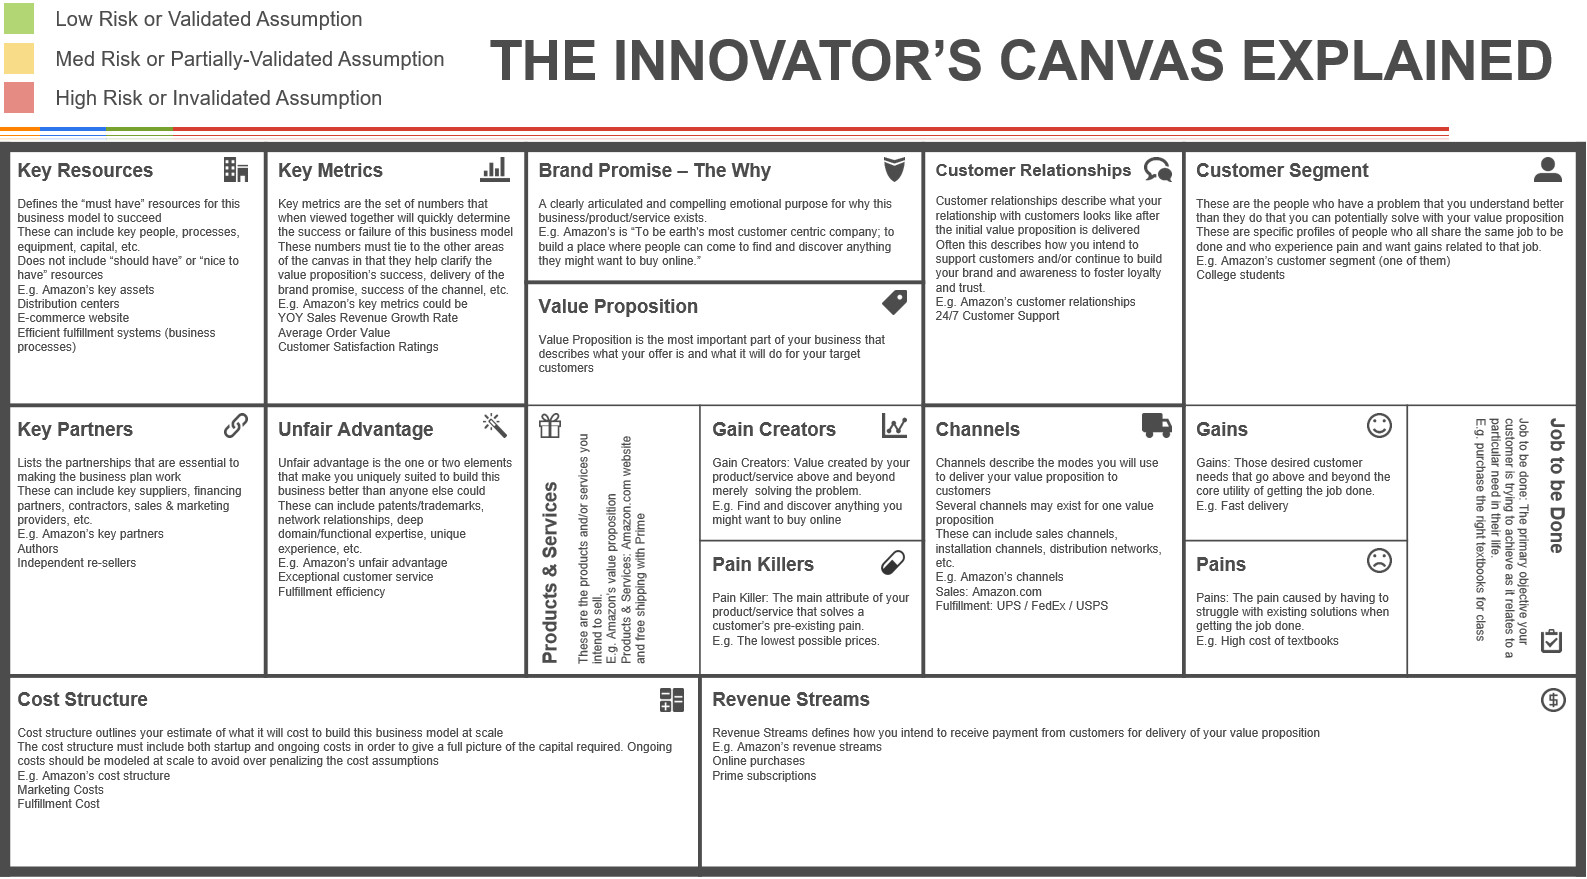 The Innovator s Canvas A Step by Step Guide to Business